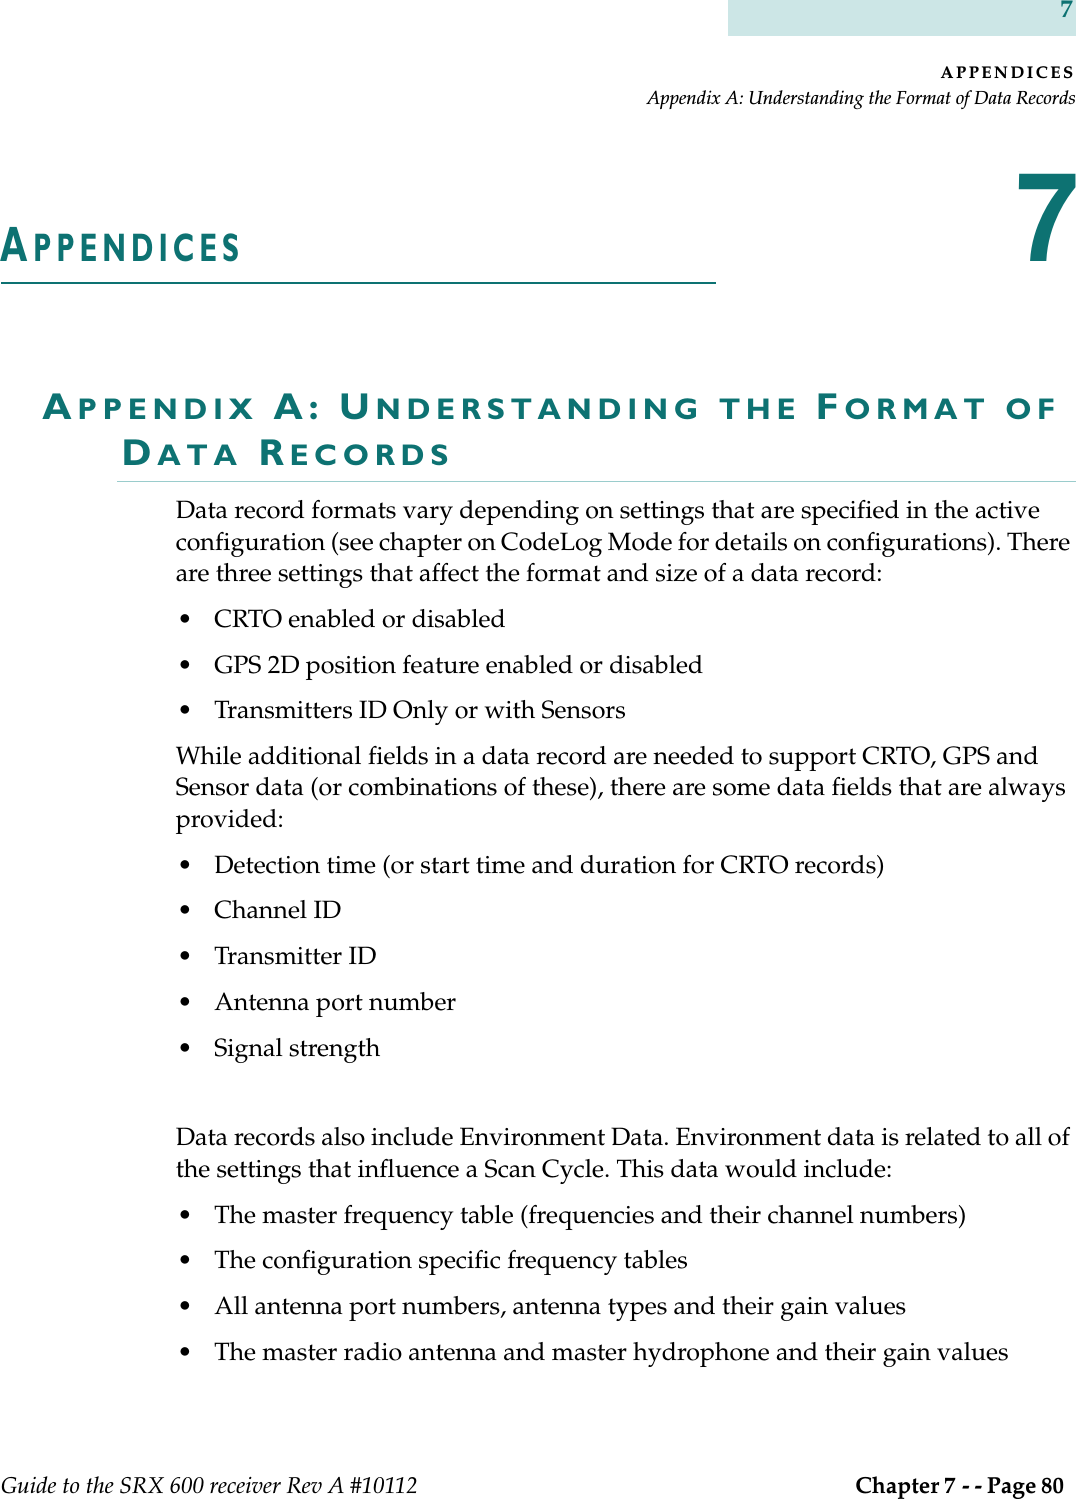 APPENDICESAppendix A: Understanding the Format of Data RecordsGuide to the SRX 600 receiver Rev A #10112  Chapter 7 - - Page 80 7APPENDICES7APPENDIX A: UNDERSTANDING THE FORMAT OF DATA RECORDSData record formats vary depending on settings that are specified in the active configuration (see chapter on CodeLog Mode for details on configurations). There are three settings that affect the format and size of a data record:• CRTO enabled or disabled• GPS 2D position feature enabled or disabled• Transmitters ID Only or with SensorsWhile additional fields in a data record are needed to support CRTO, GPS and Sensor data (or combinations of these), there are some data fields that are always provided:• Detection time (or start time and duration for CRTO records)• Channel ID• Transmitter ID• Antenna port number• Signal strengthData records also include Environment Data. Environment data is related to all of the settings that influence a Scan Cycle. This data would include:• The master frequency table (frequencies and their channel numbers)• The configuration specific frequency tables • All antenna port numbers, antenna types and their gain values• The master radio antenna and master hydrophone and their gain values